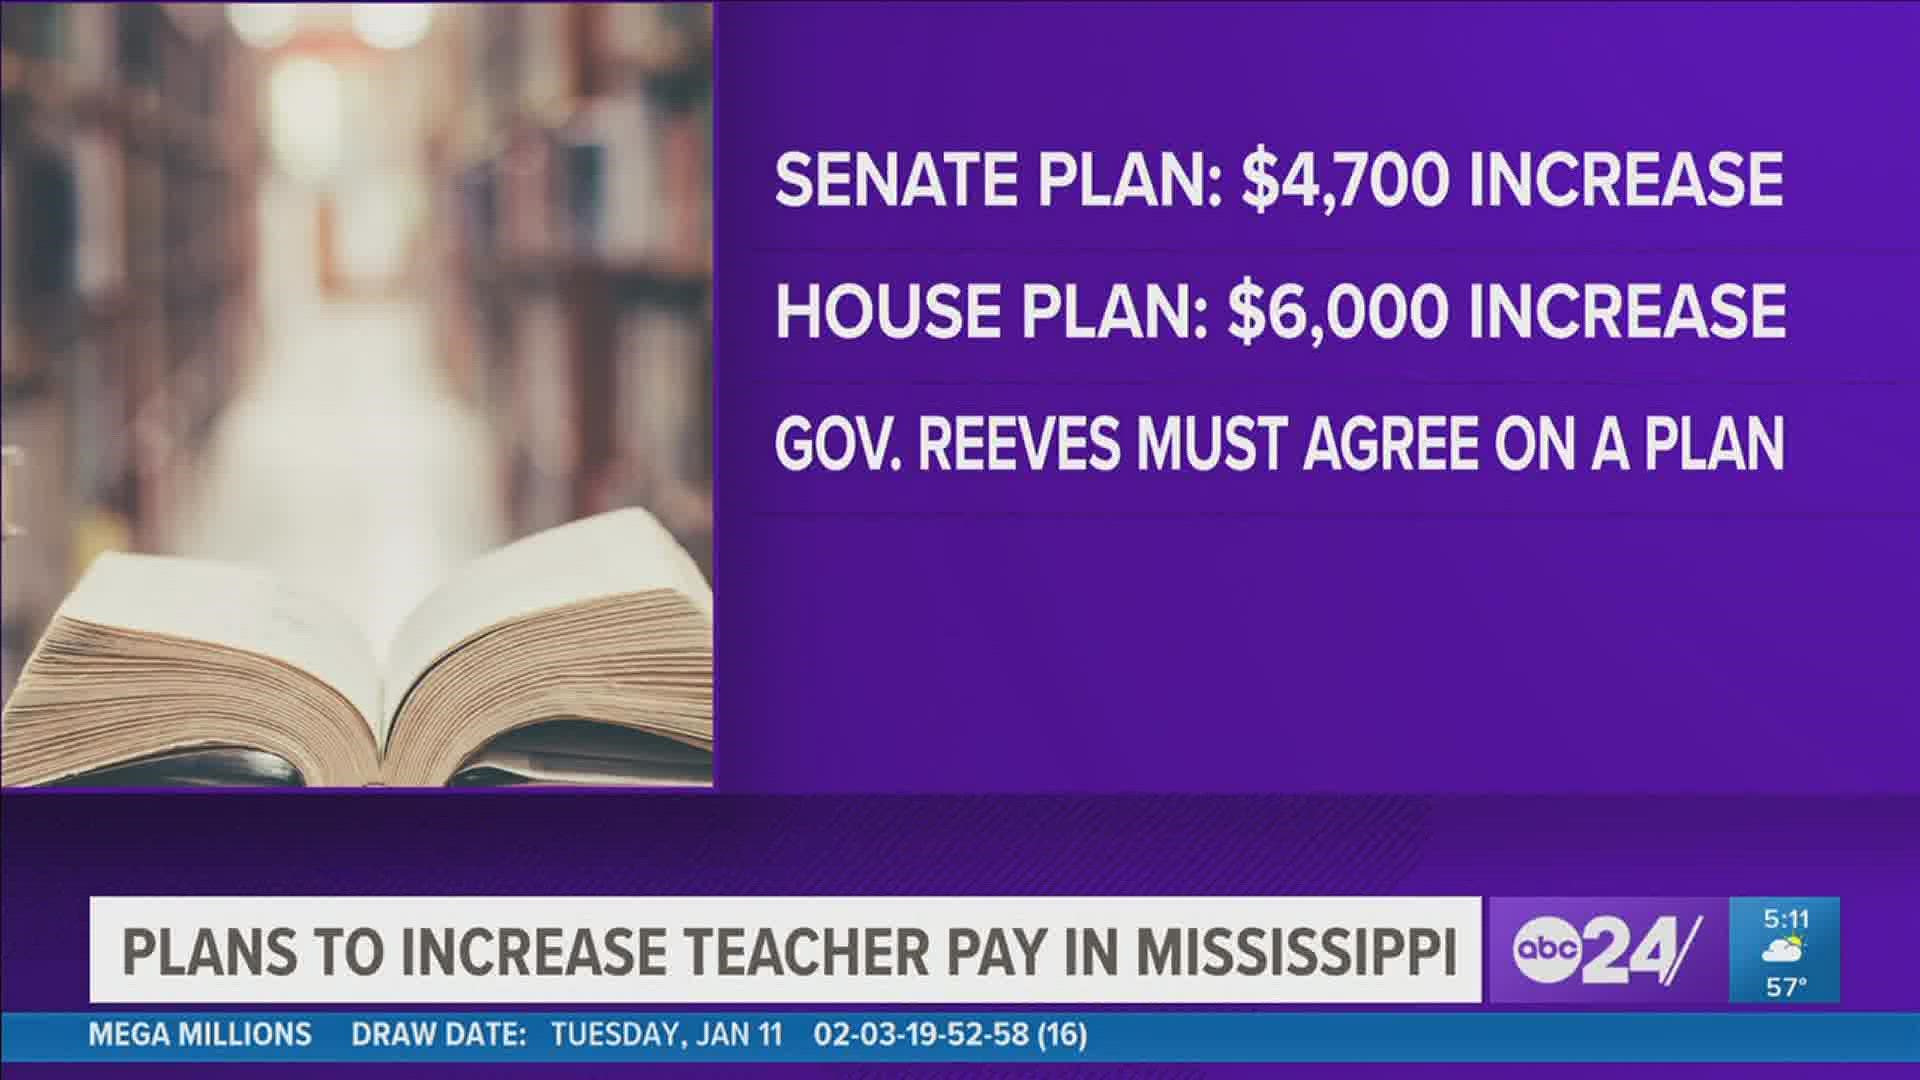 Mississippi Senate leaders are proposing a plan to increase teachers' pay an average of $4,700 over two years.